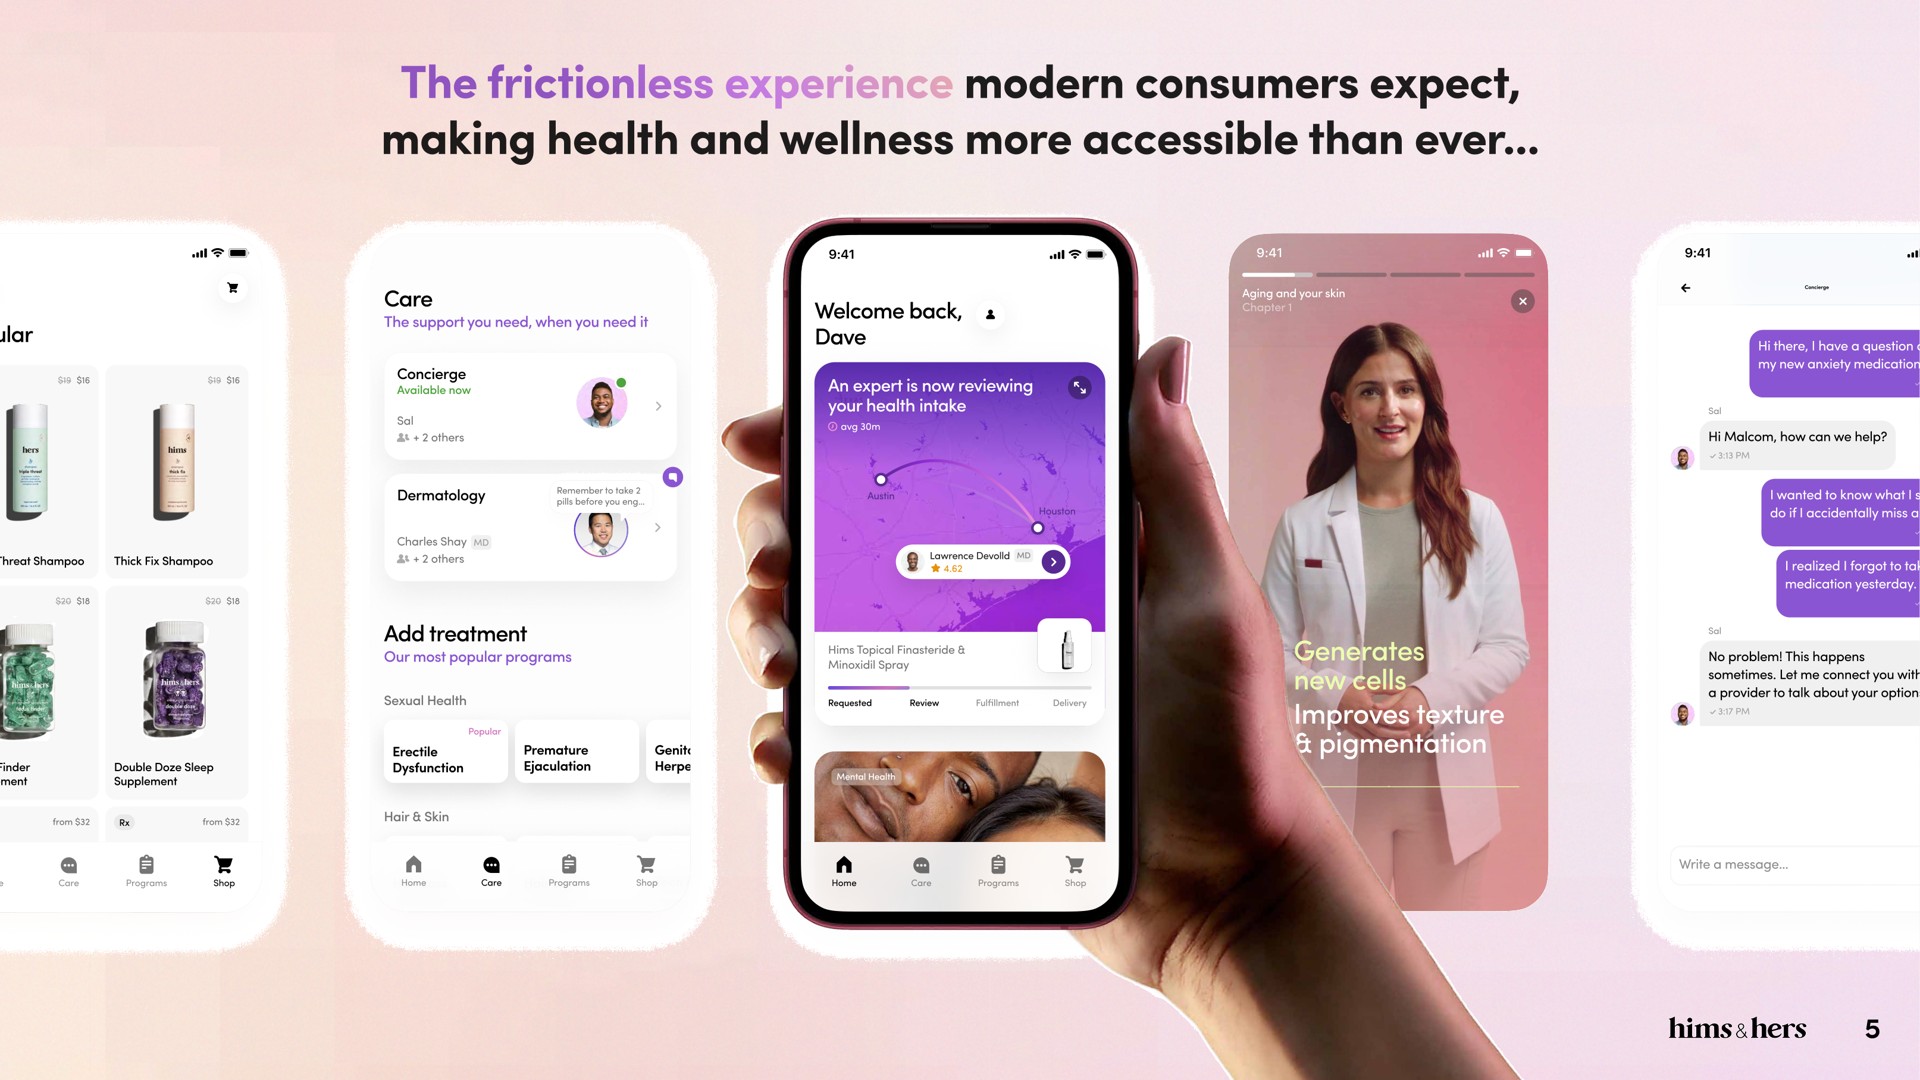 modern consumers expect the frictionless making health and wellness more accessible than ever | Hims & Hers